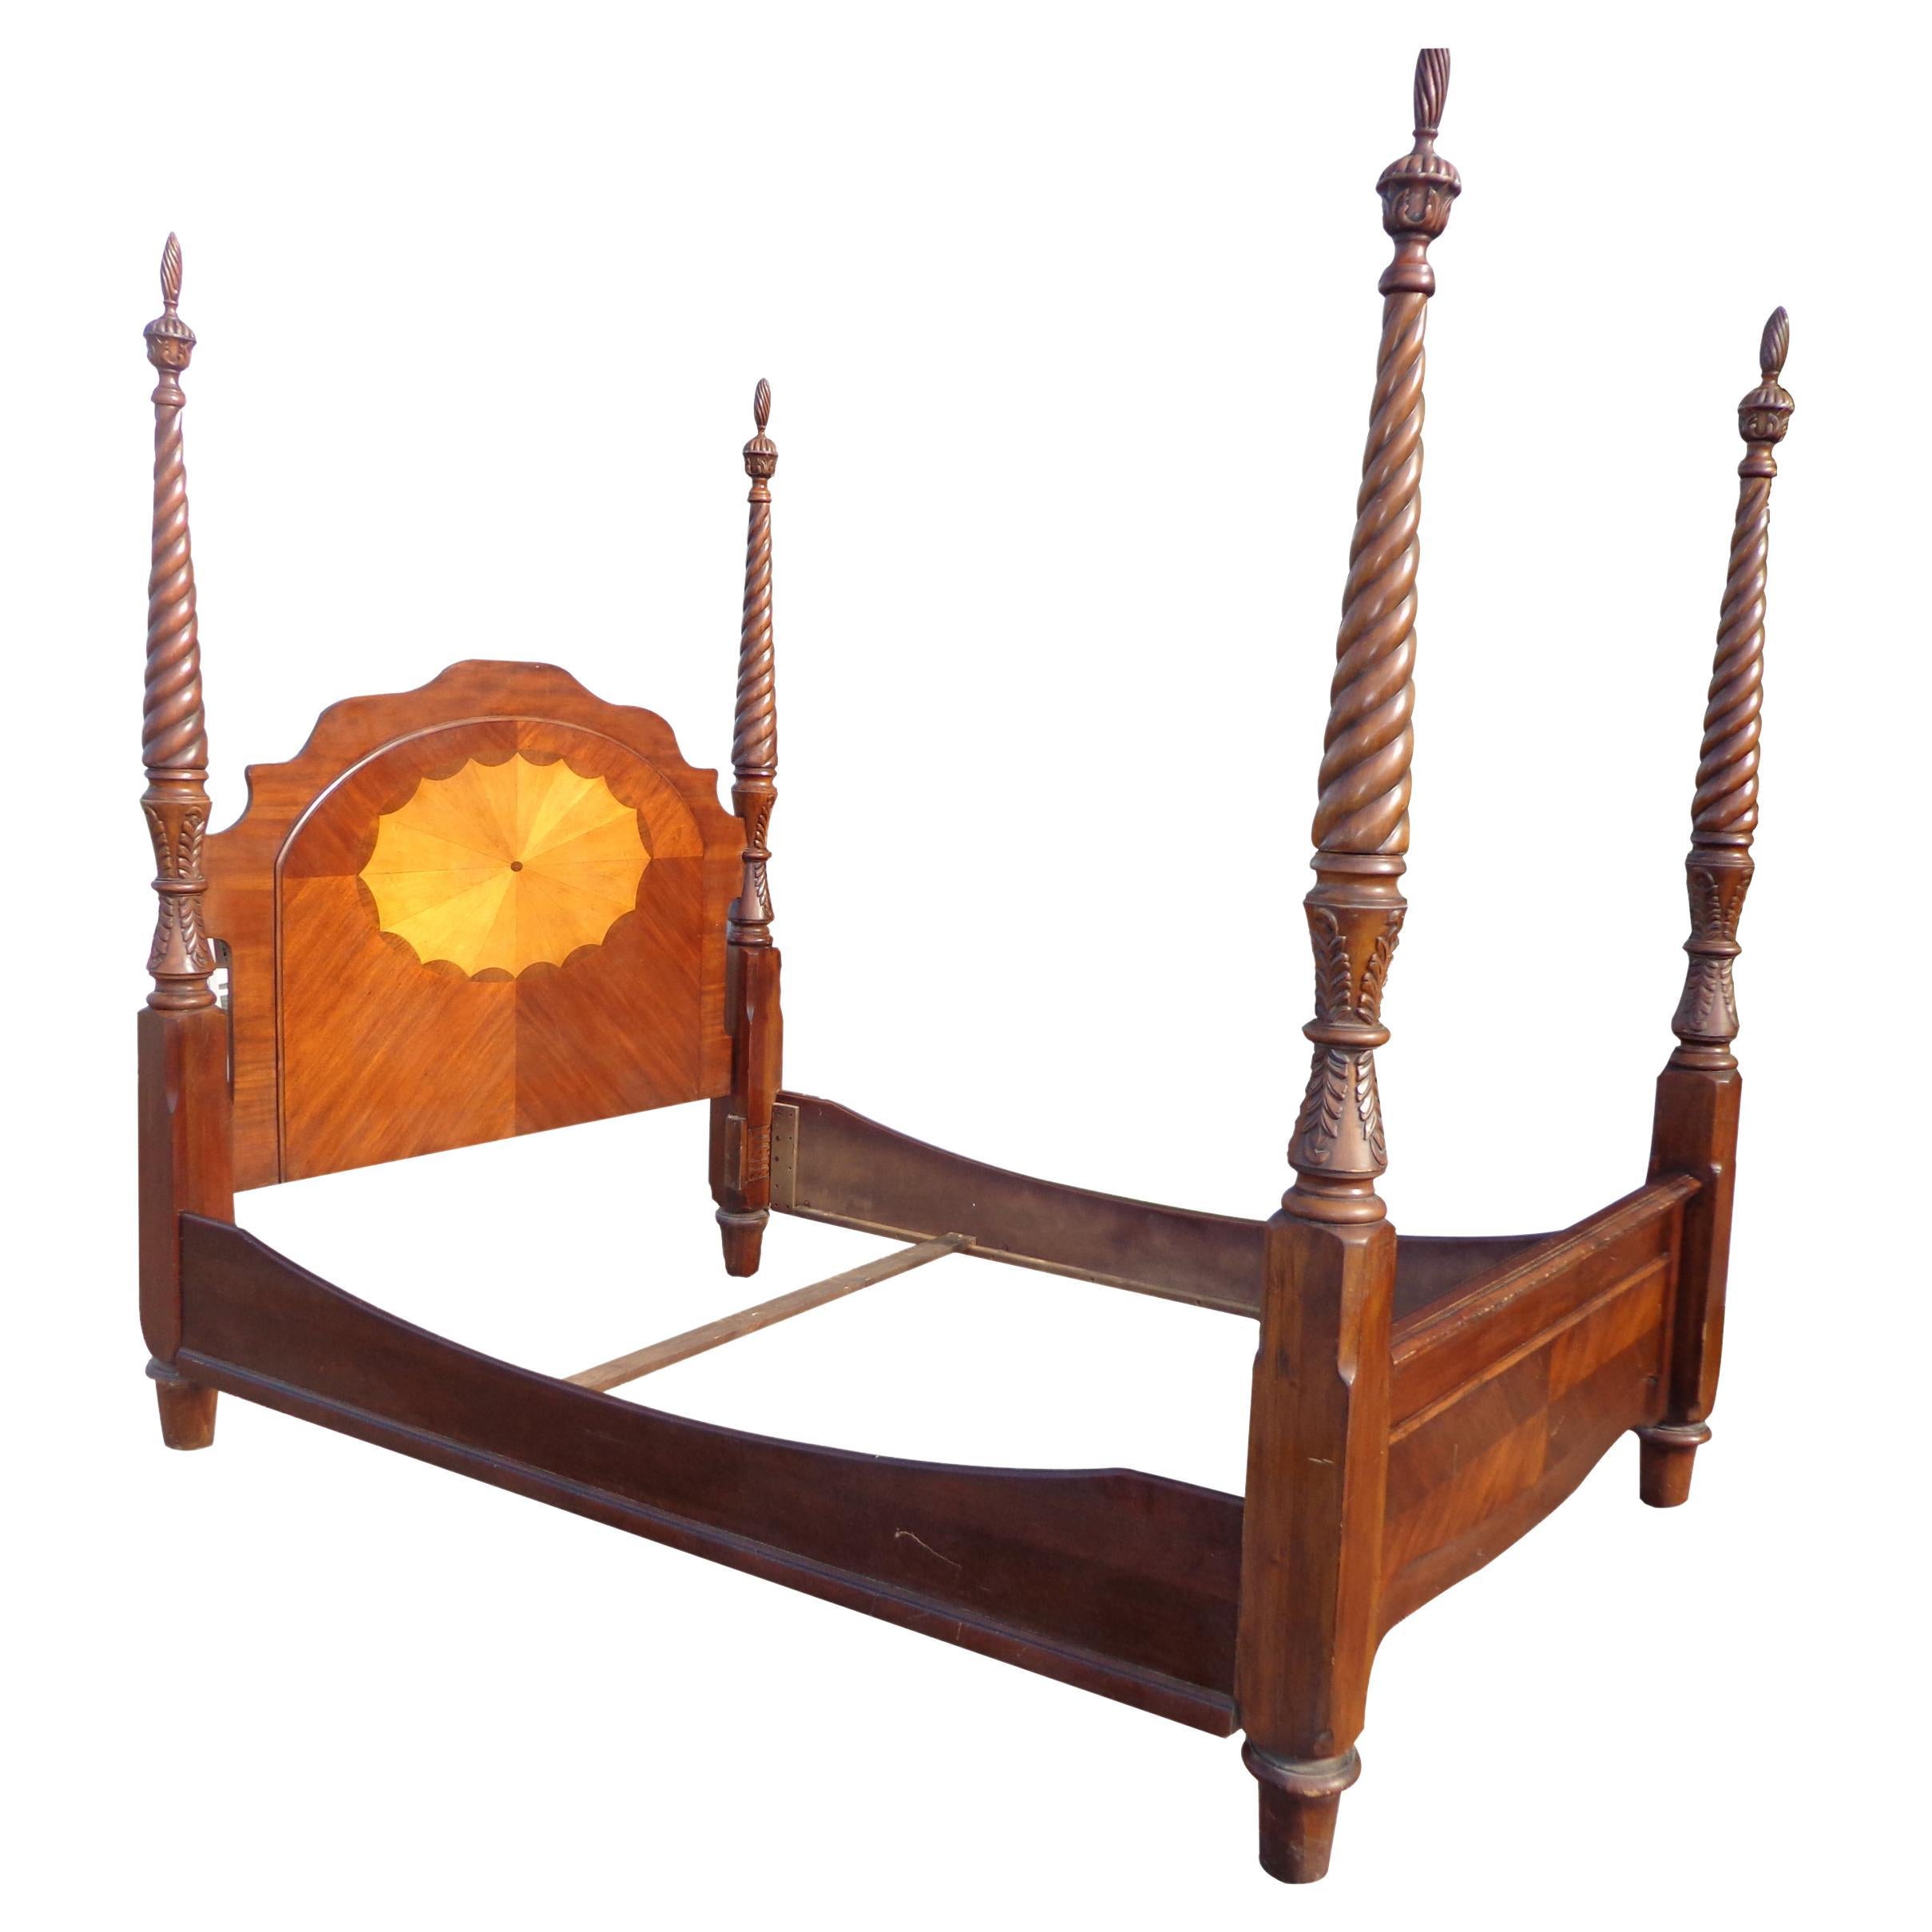 Antique Style 4 Poster Bed